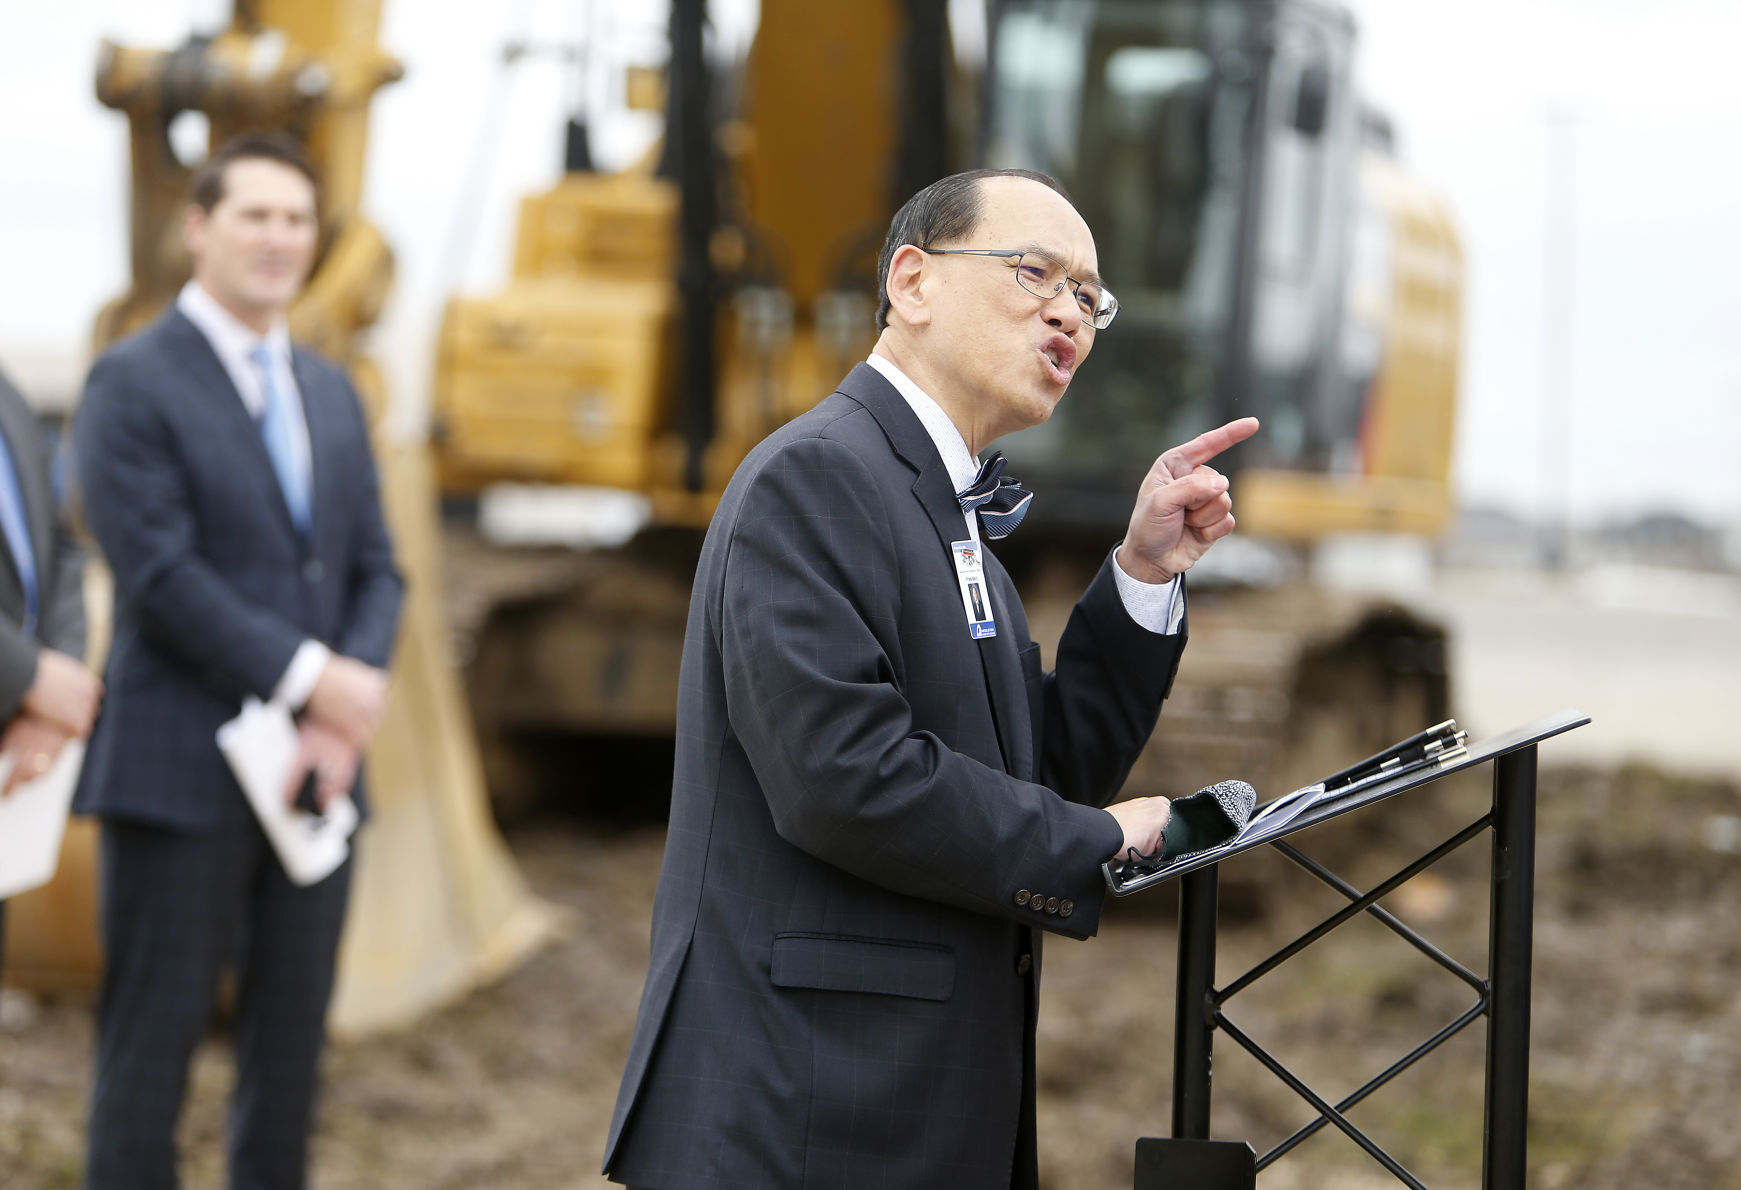 Northeast Iowa Community College President Dr. Liang Chee Wee speaks during a groundbreaking for the College Suites that will be constructed on the NICC Peosta Campus, Thursday, March 25, 2021. PHOTO CREDIT: Dave Kettering